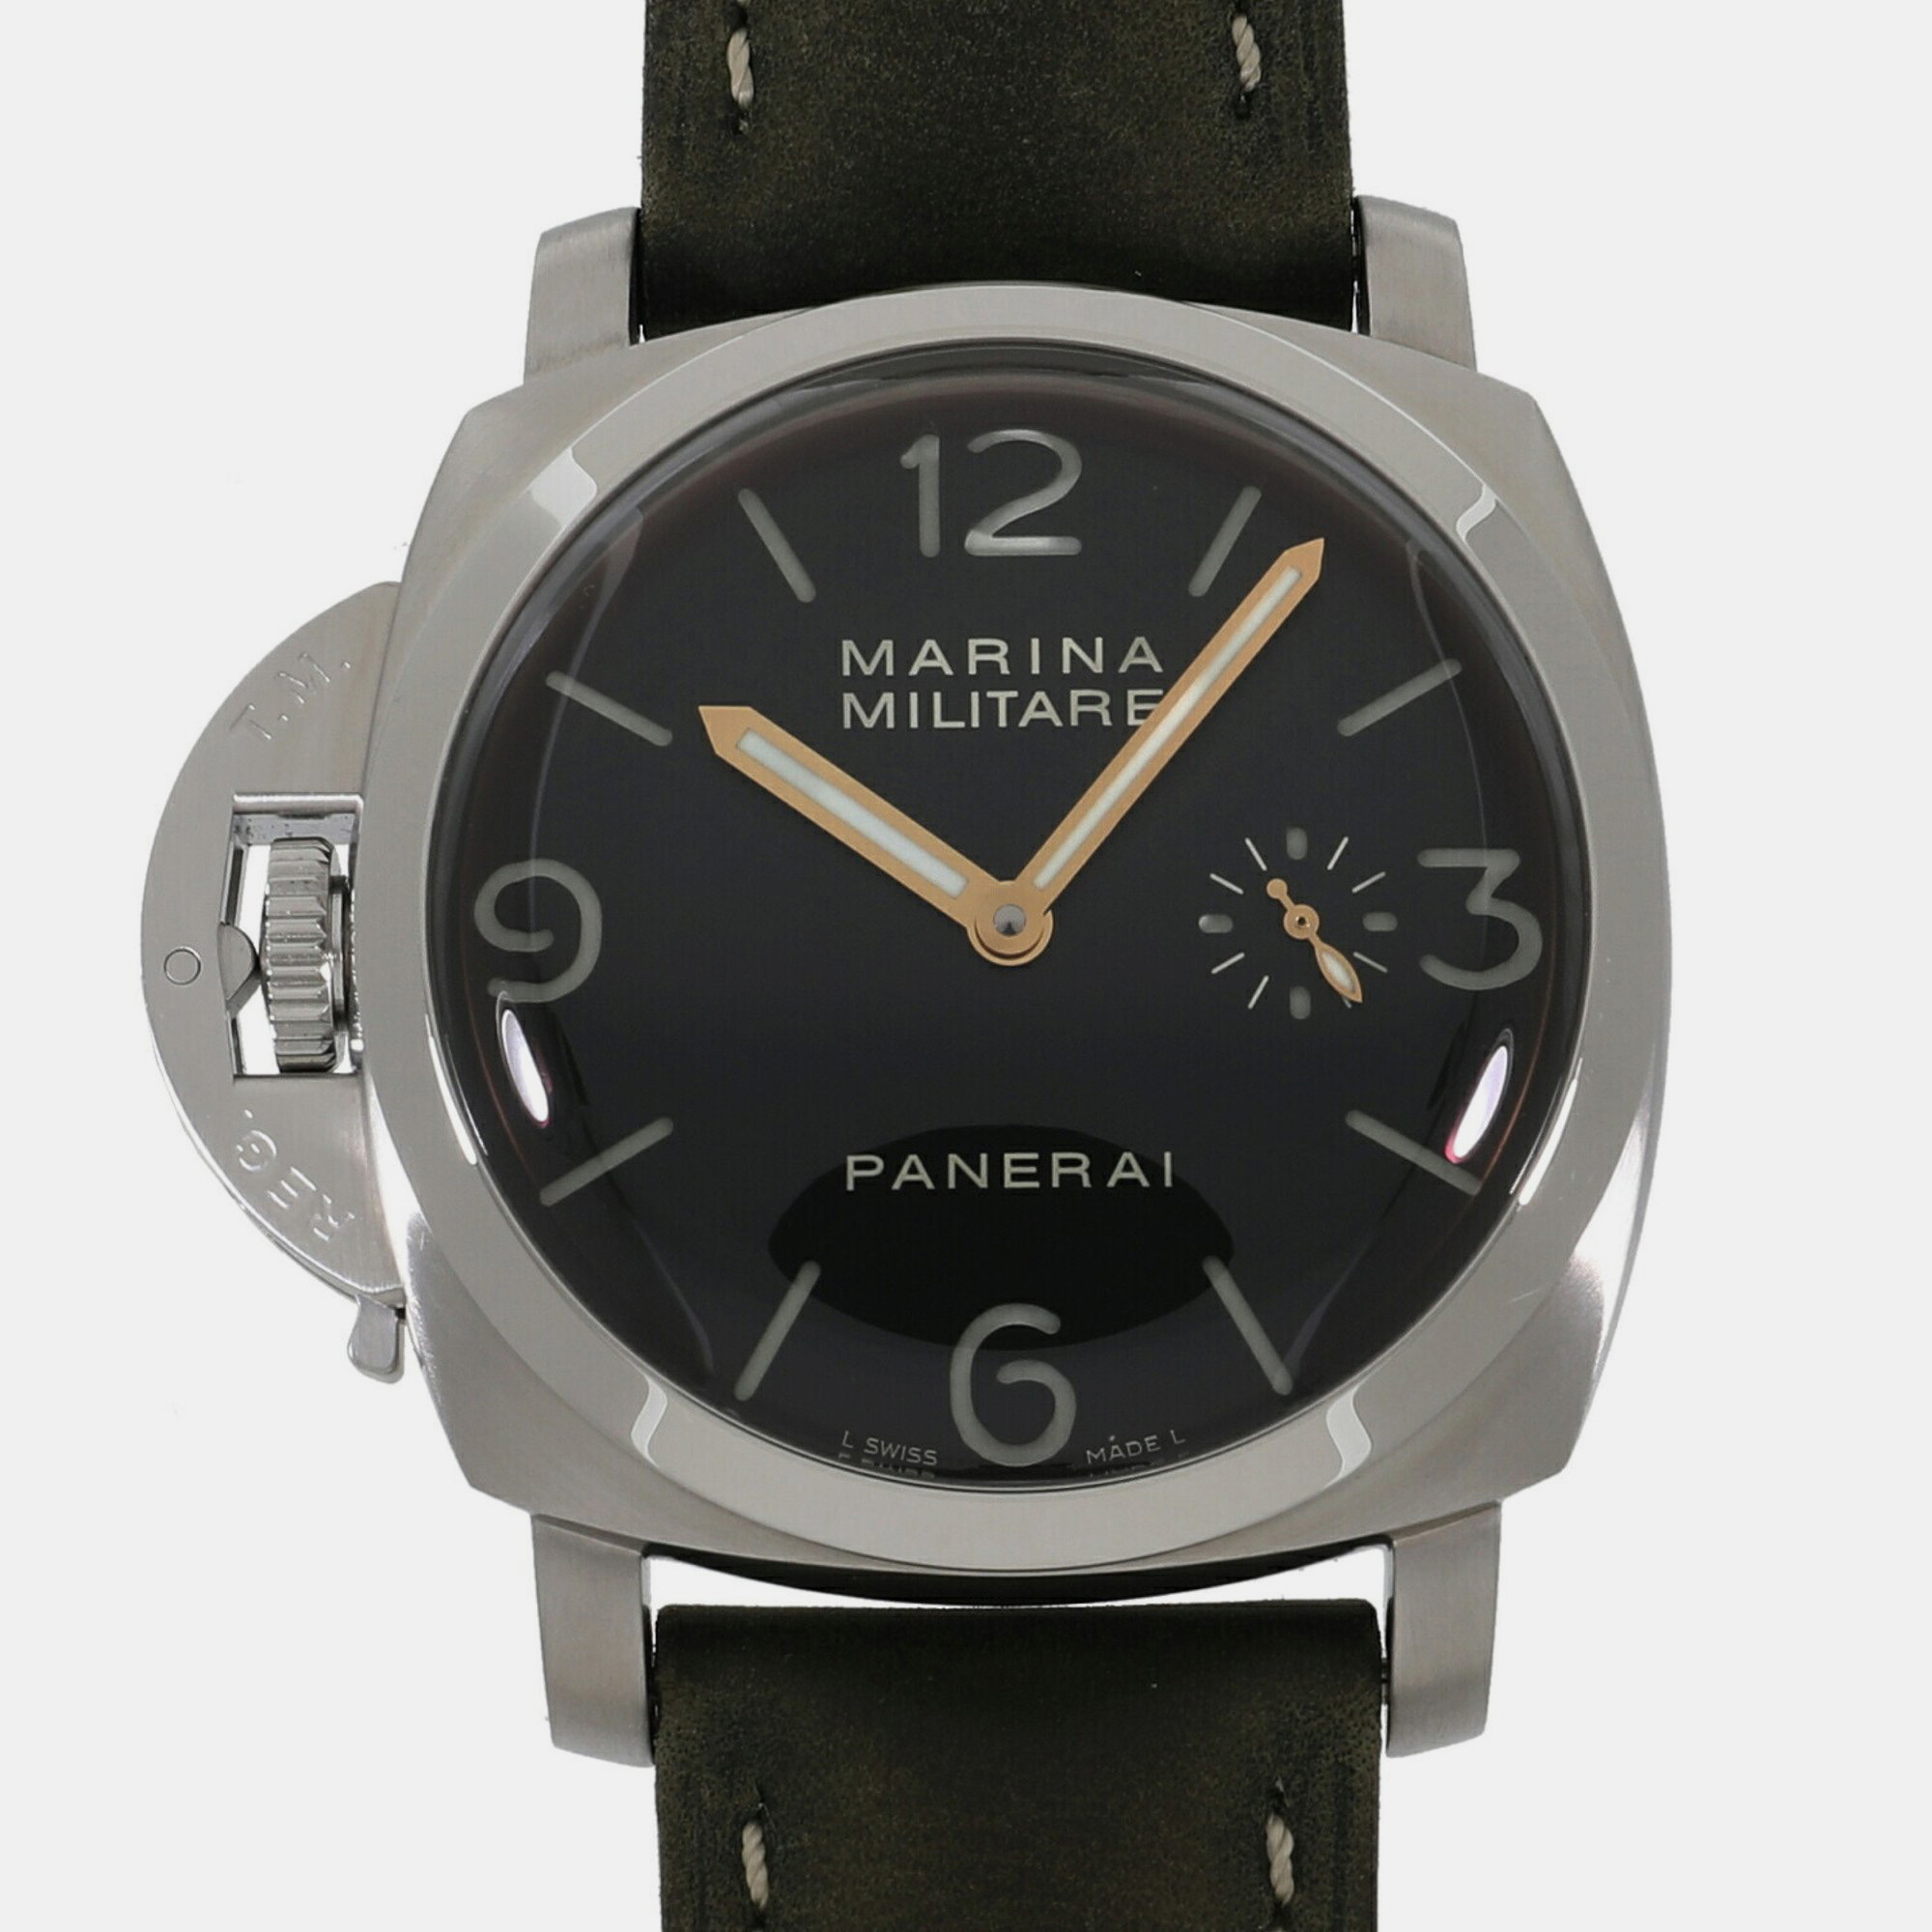 This Panerai luxury watch is characterized by skillful craftsmanship and understated charm. Meticulously constructed to tell time in an elegant way it comes in a sturdy case and flaunts a seamless blend of innovative design and flawless style.